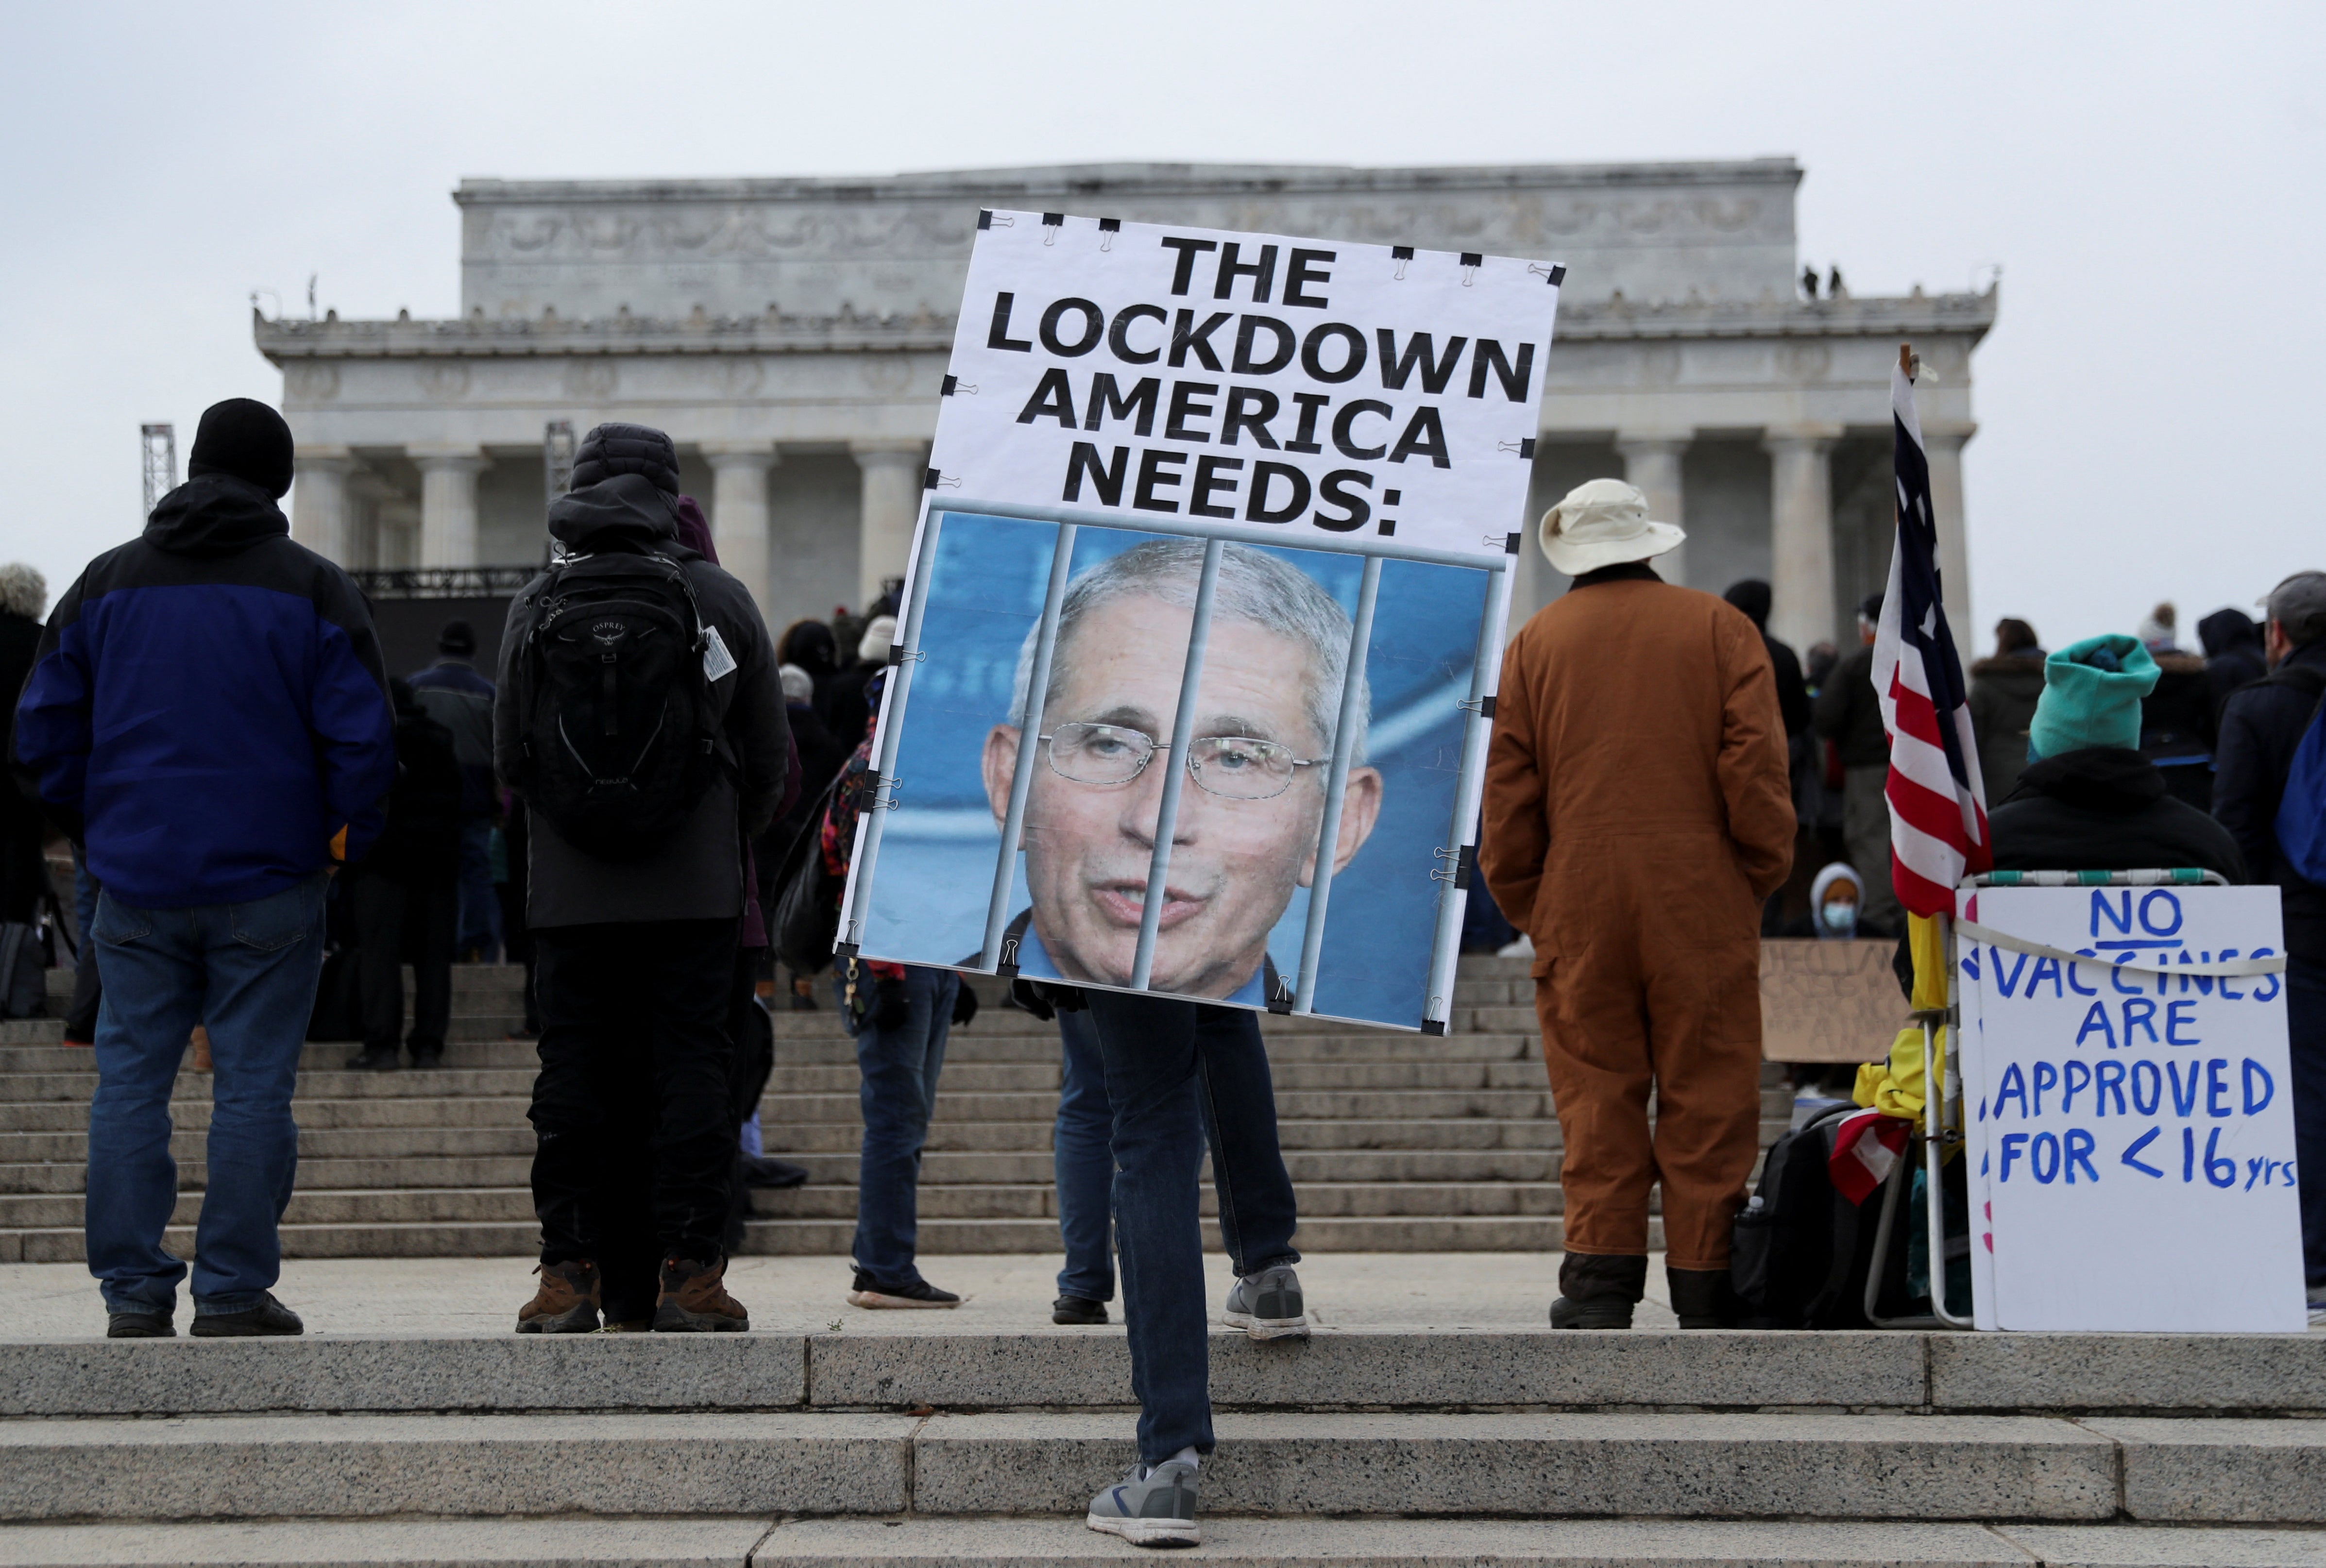 A person holds a placard outside the Lincoln Memorial during a march in opposition to Covid-19 vaccine mandates